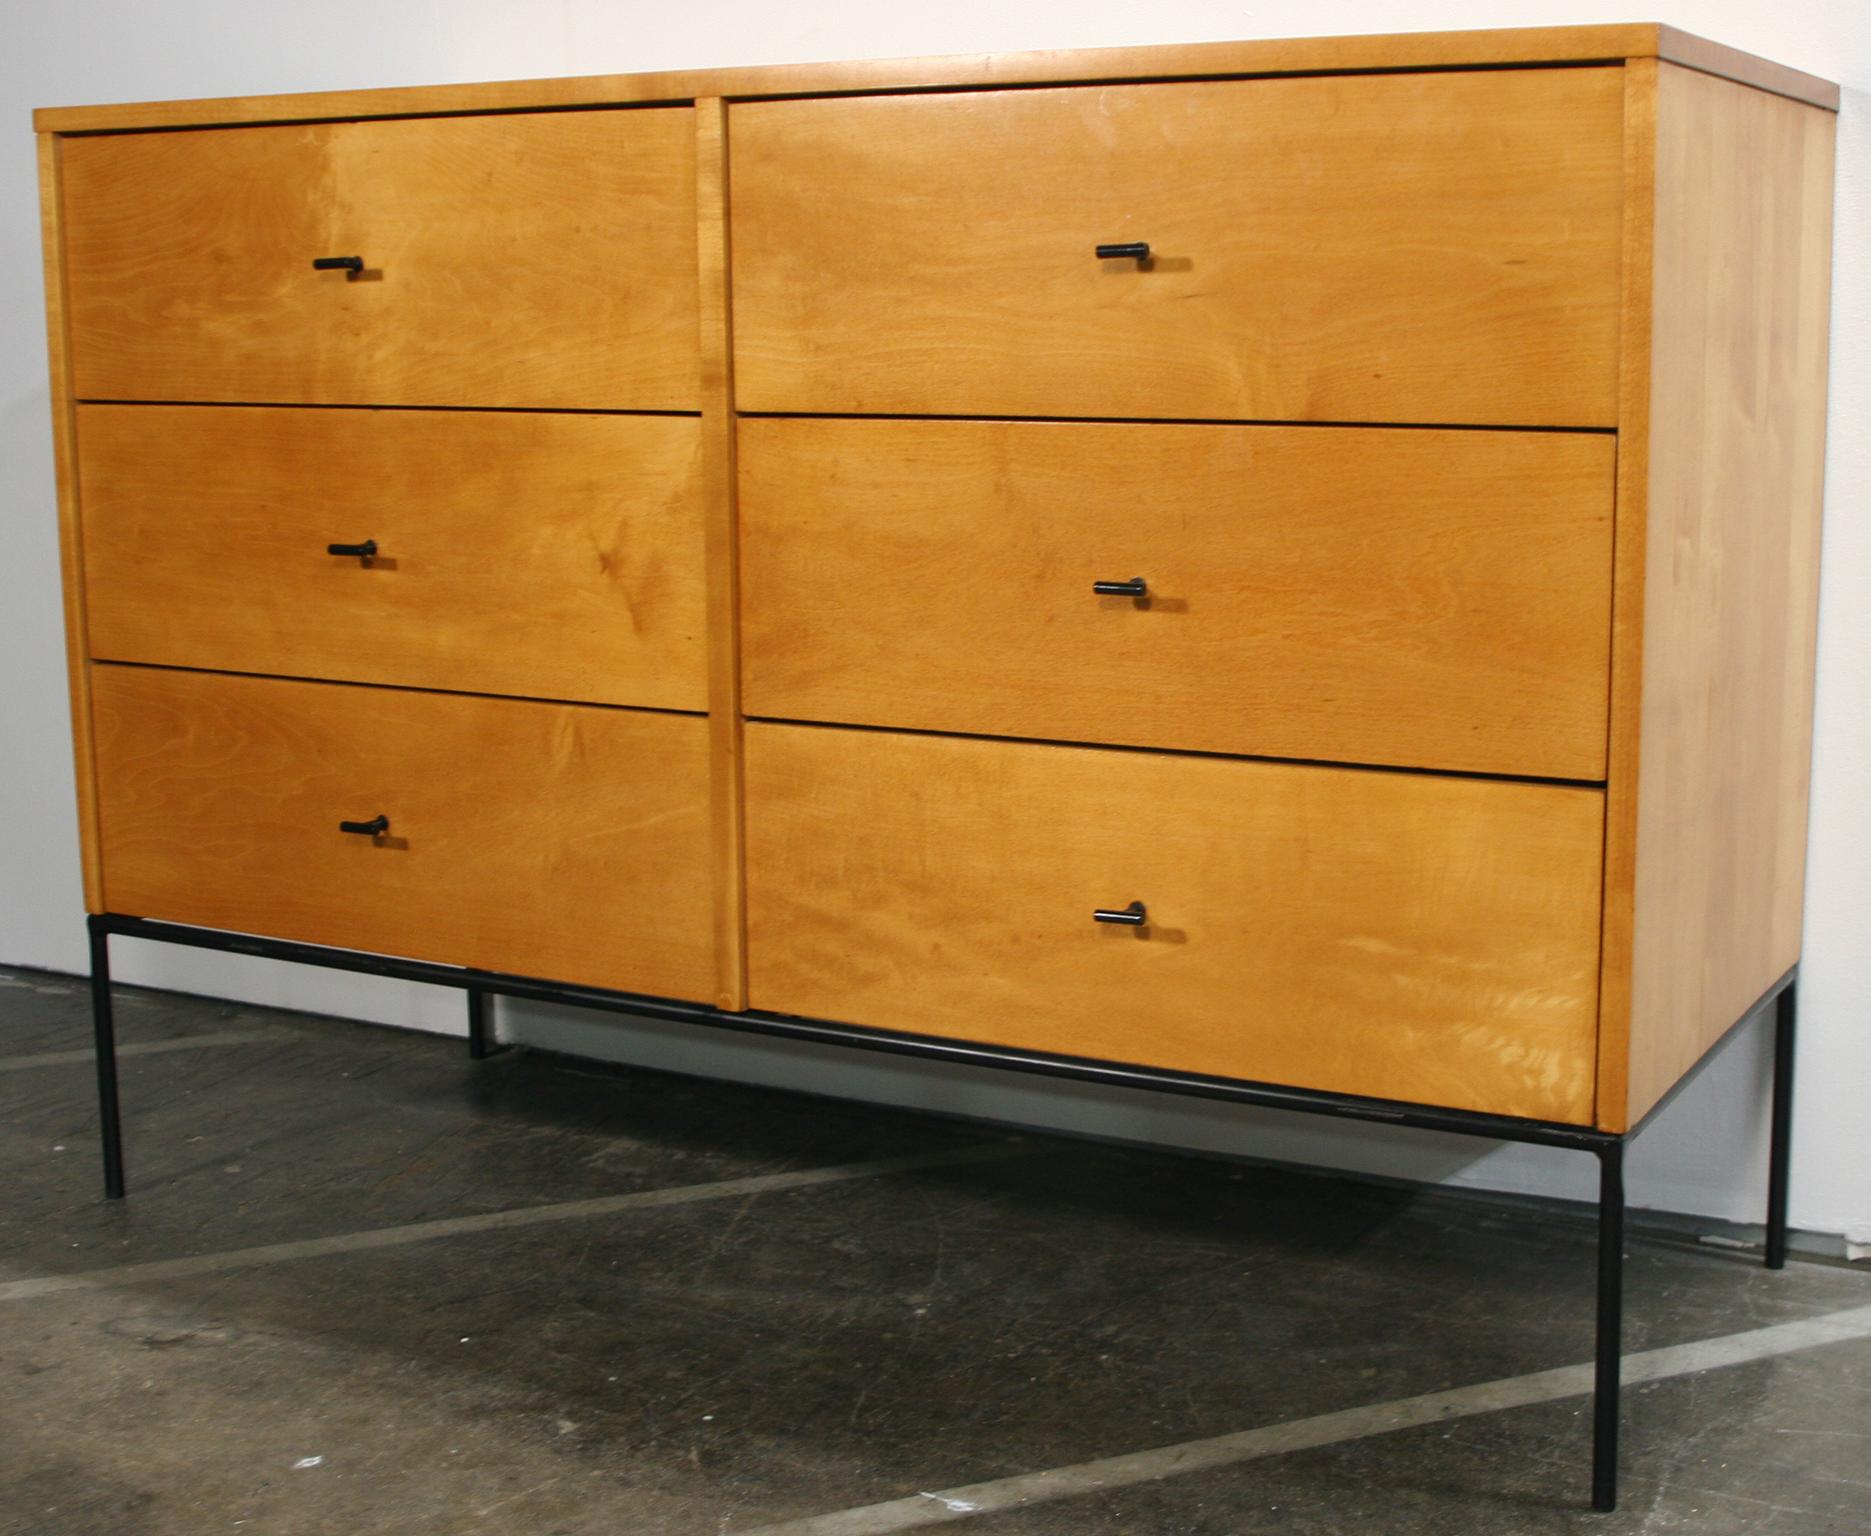 Vintage midcentury super clean fully restored Paul McCobb six-drawer dresser credenza Planner Group #1509. Beautiful dresser by Paul McCobb circa 1950s Planner Group, 6 drawer, solid maple, black T pulls. Rare black iron base. Clean inside and out.